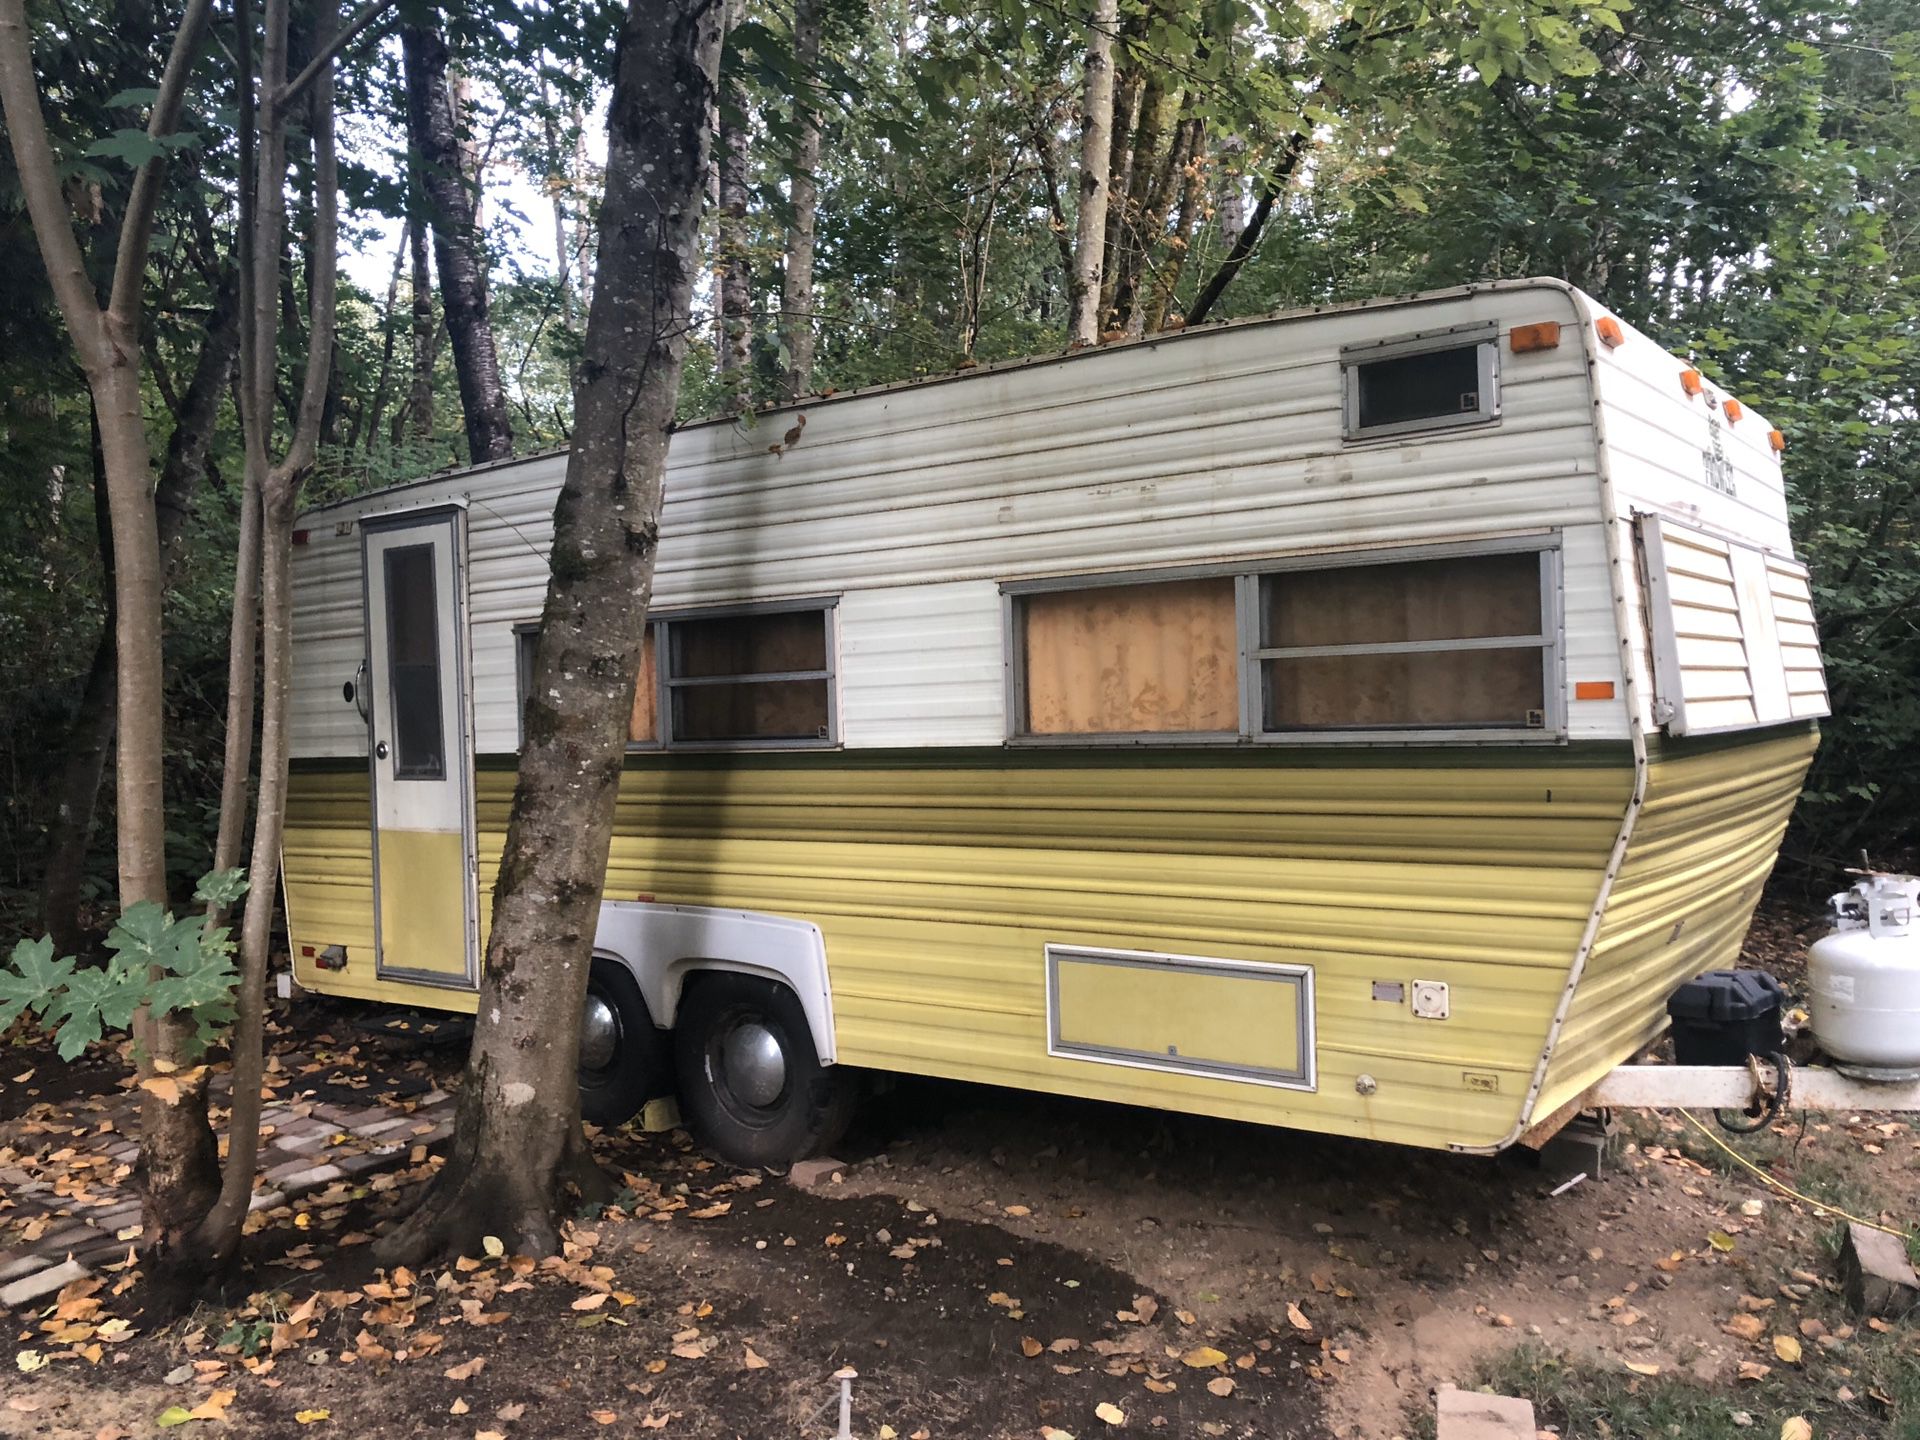 Modified 1976 Prowler Travel trailer